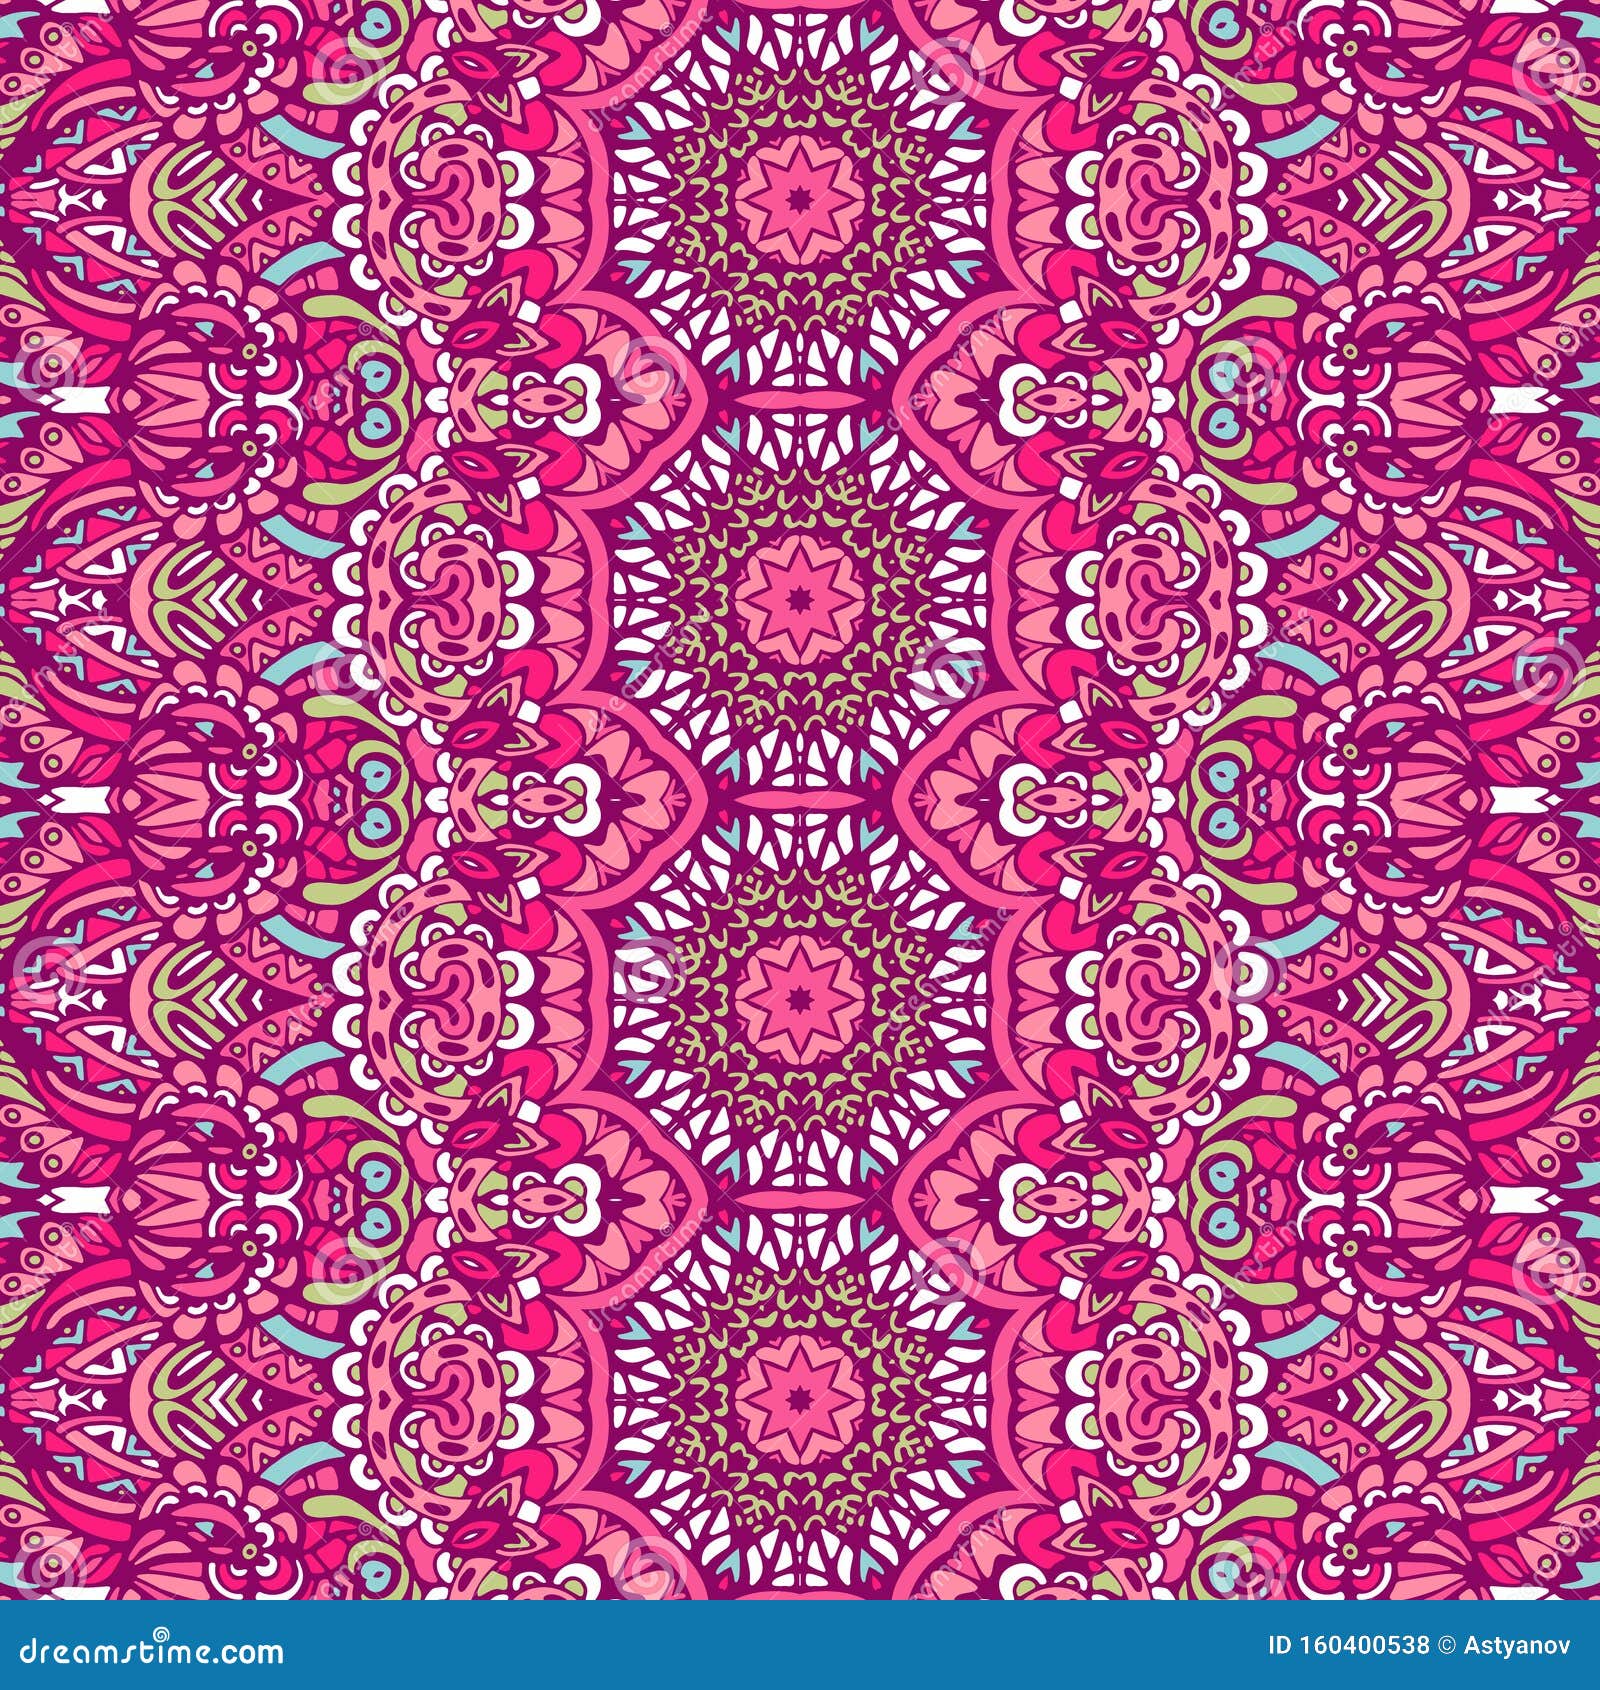 Pink Tribal Ethnic Festive Abstract Floral Vector Pattern Stock ...